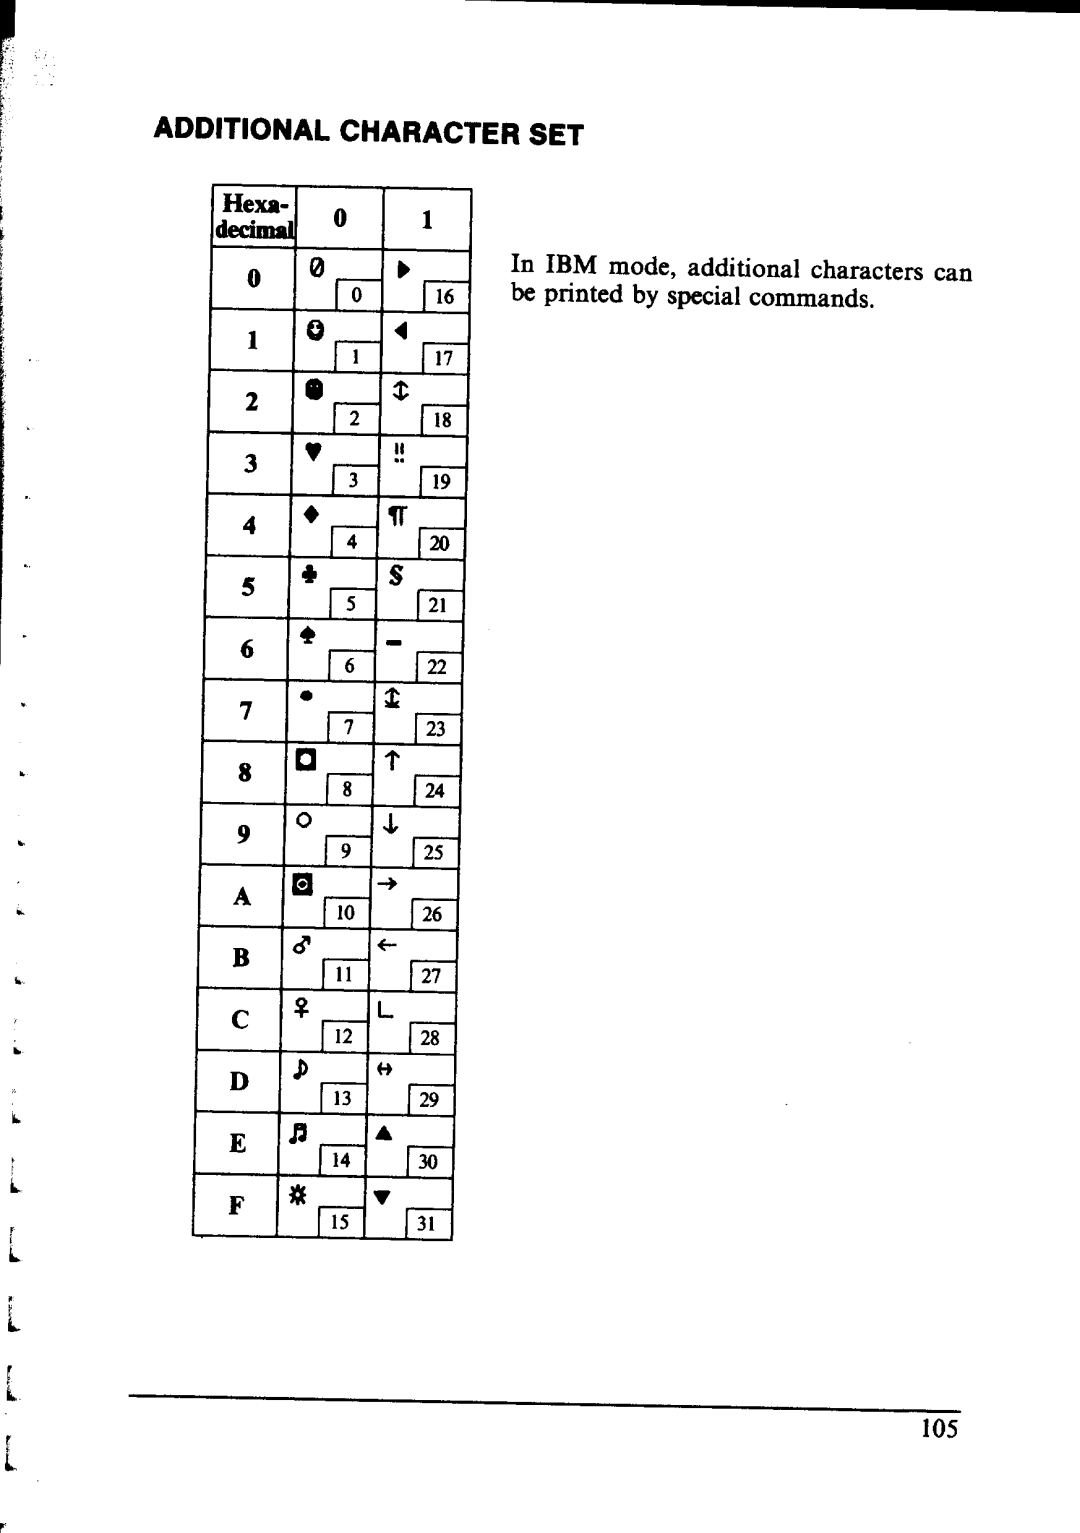 Star Micronics NX-1000 Additional Character Set, In IBM mode, additional characters can be printed by special commands 